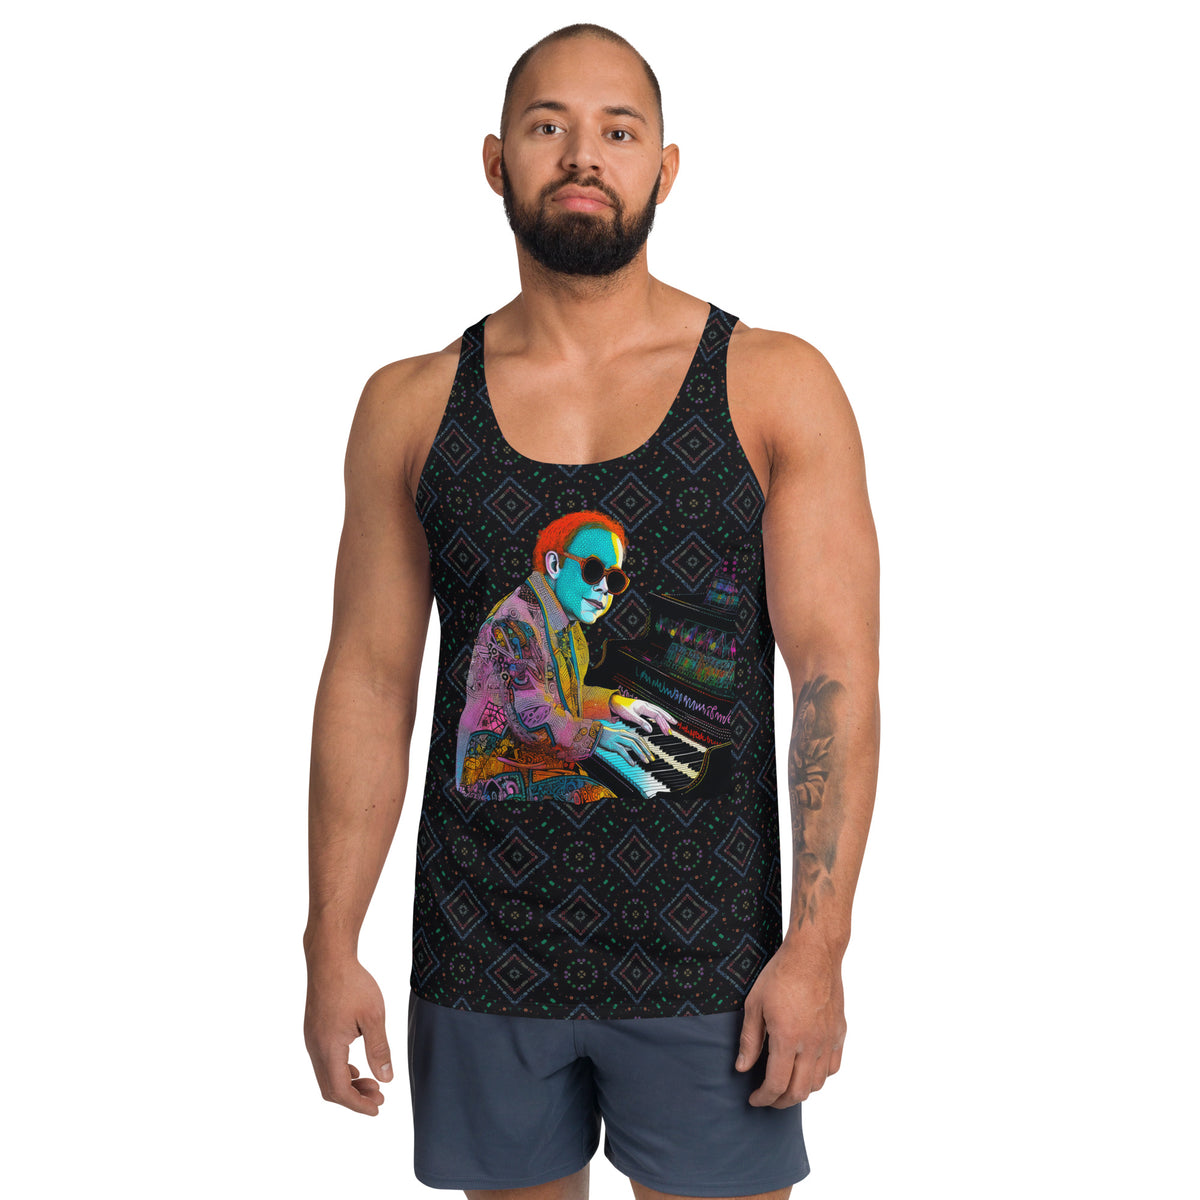 Man wearing Doodle Fusion tank top with intricate design.